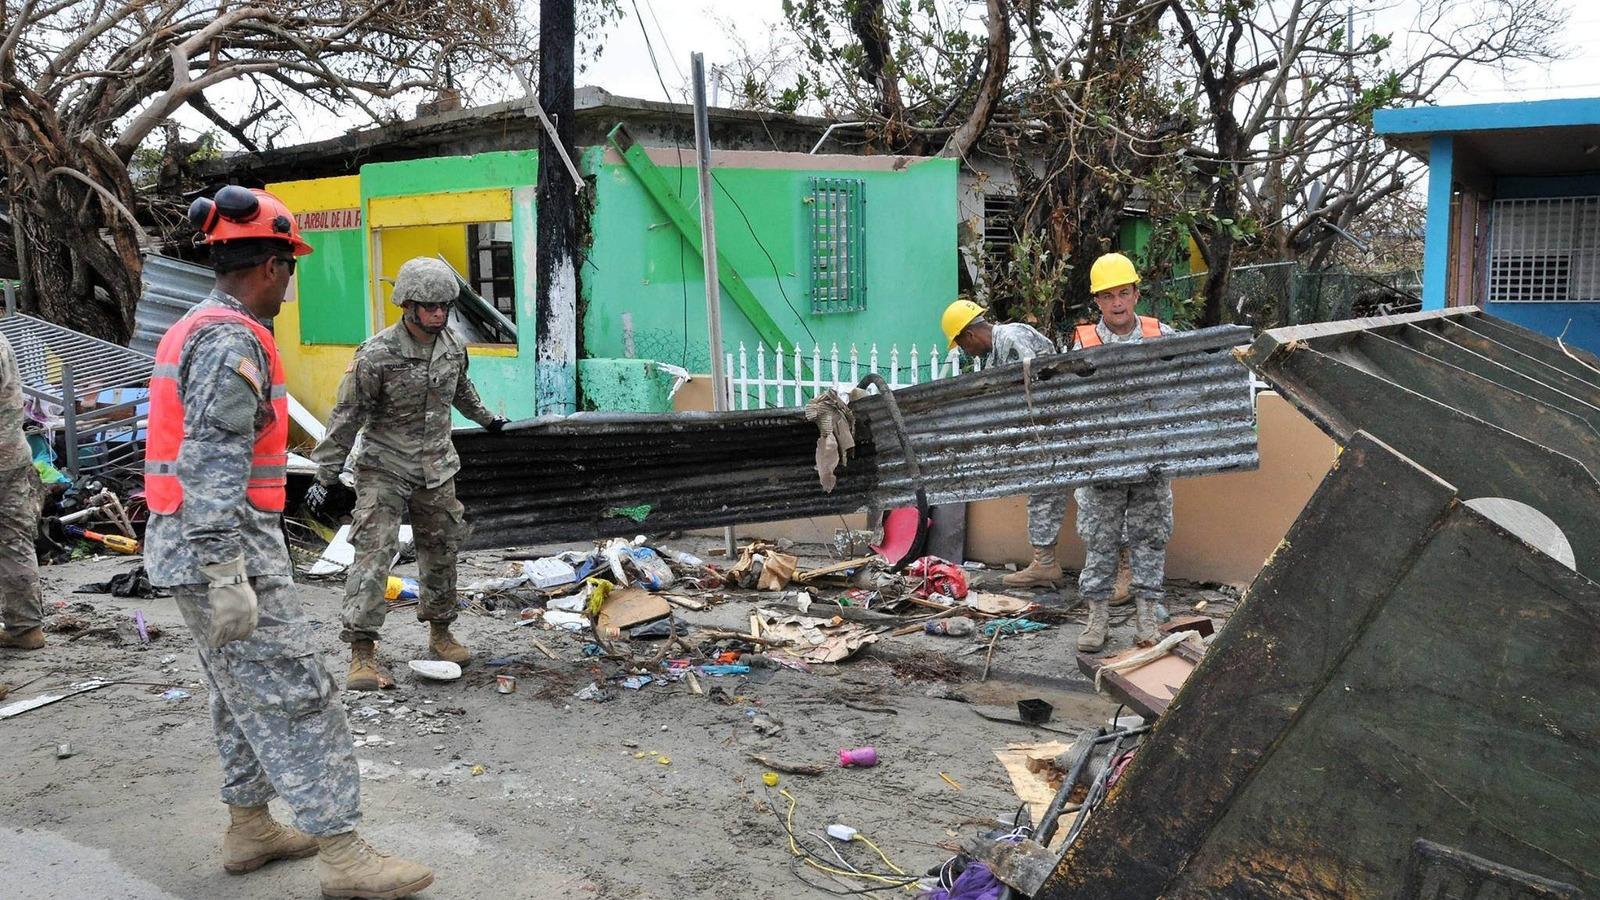 Soldiers of the Puerto Rico National Guard and volunteers of the Puerto Rico State Guard clear a road at Punta Santiago in Humacao, Puerto Rico. Scenes of utter devastation were found throughout the island after Hurricane Maria hit last September.